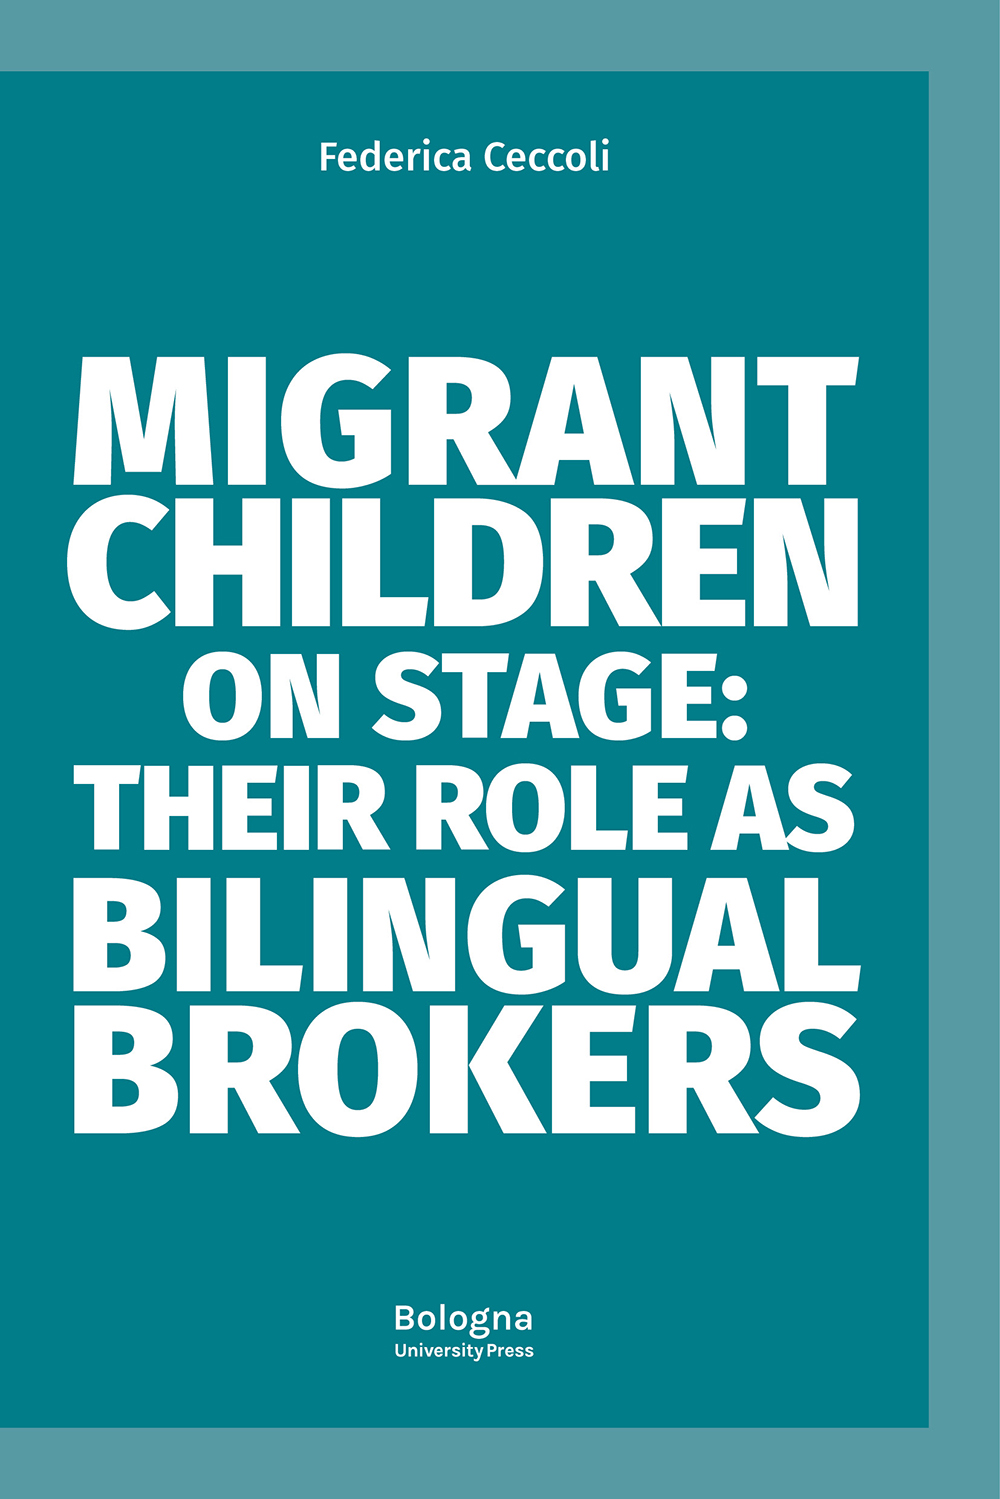 Migrant Children on Stage: Their Role as Bilingual Brokers - Bologna University Press